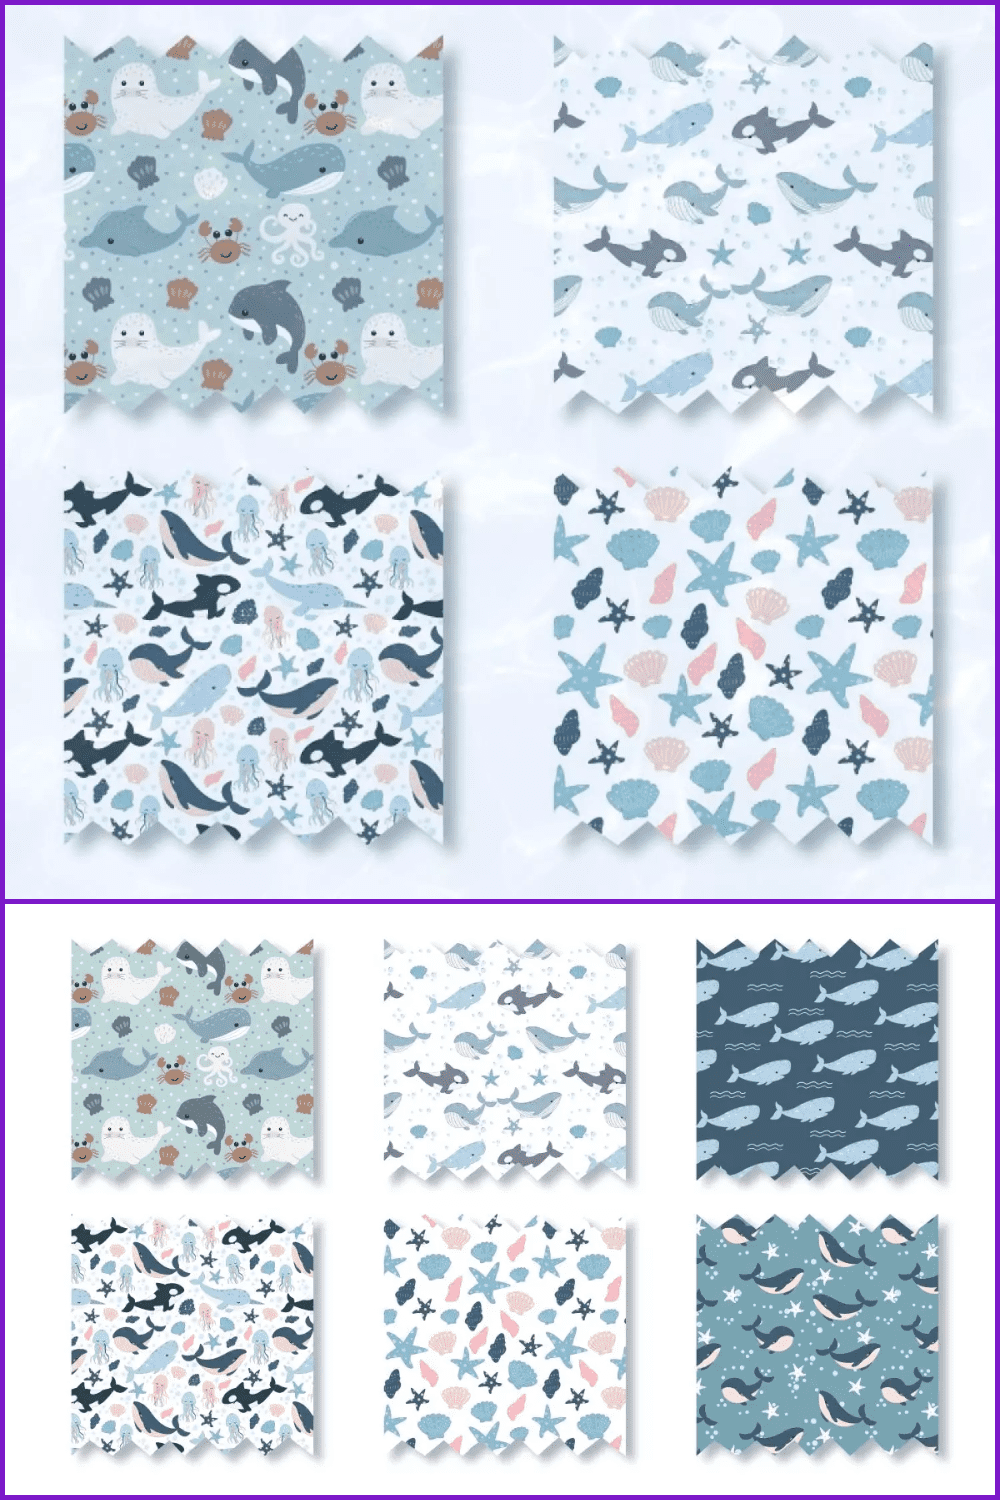 Seamless patterns in gentle colors on the marine theme.